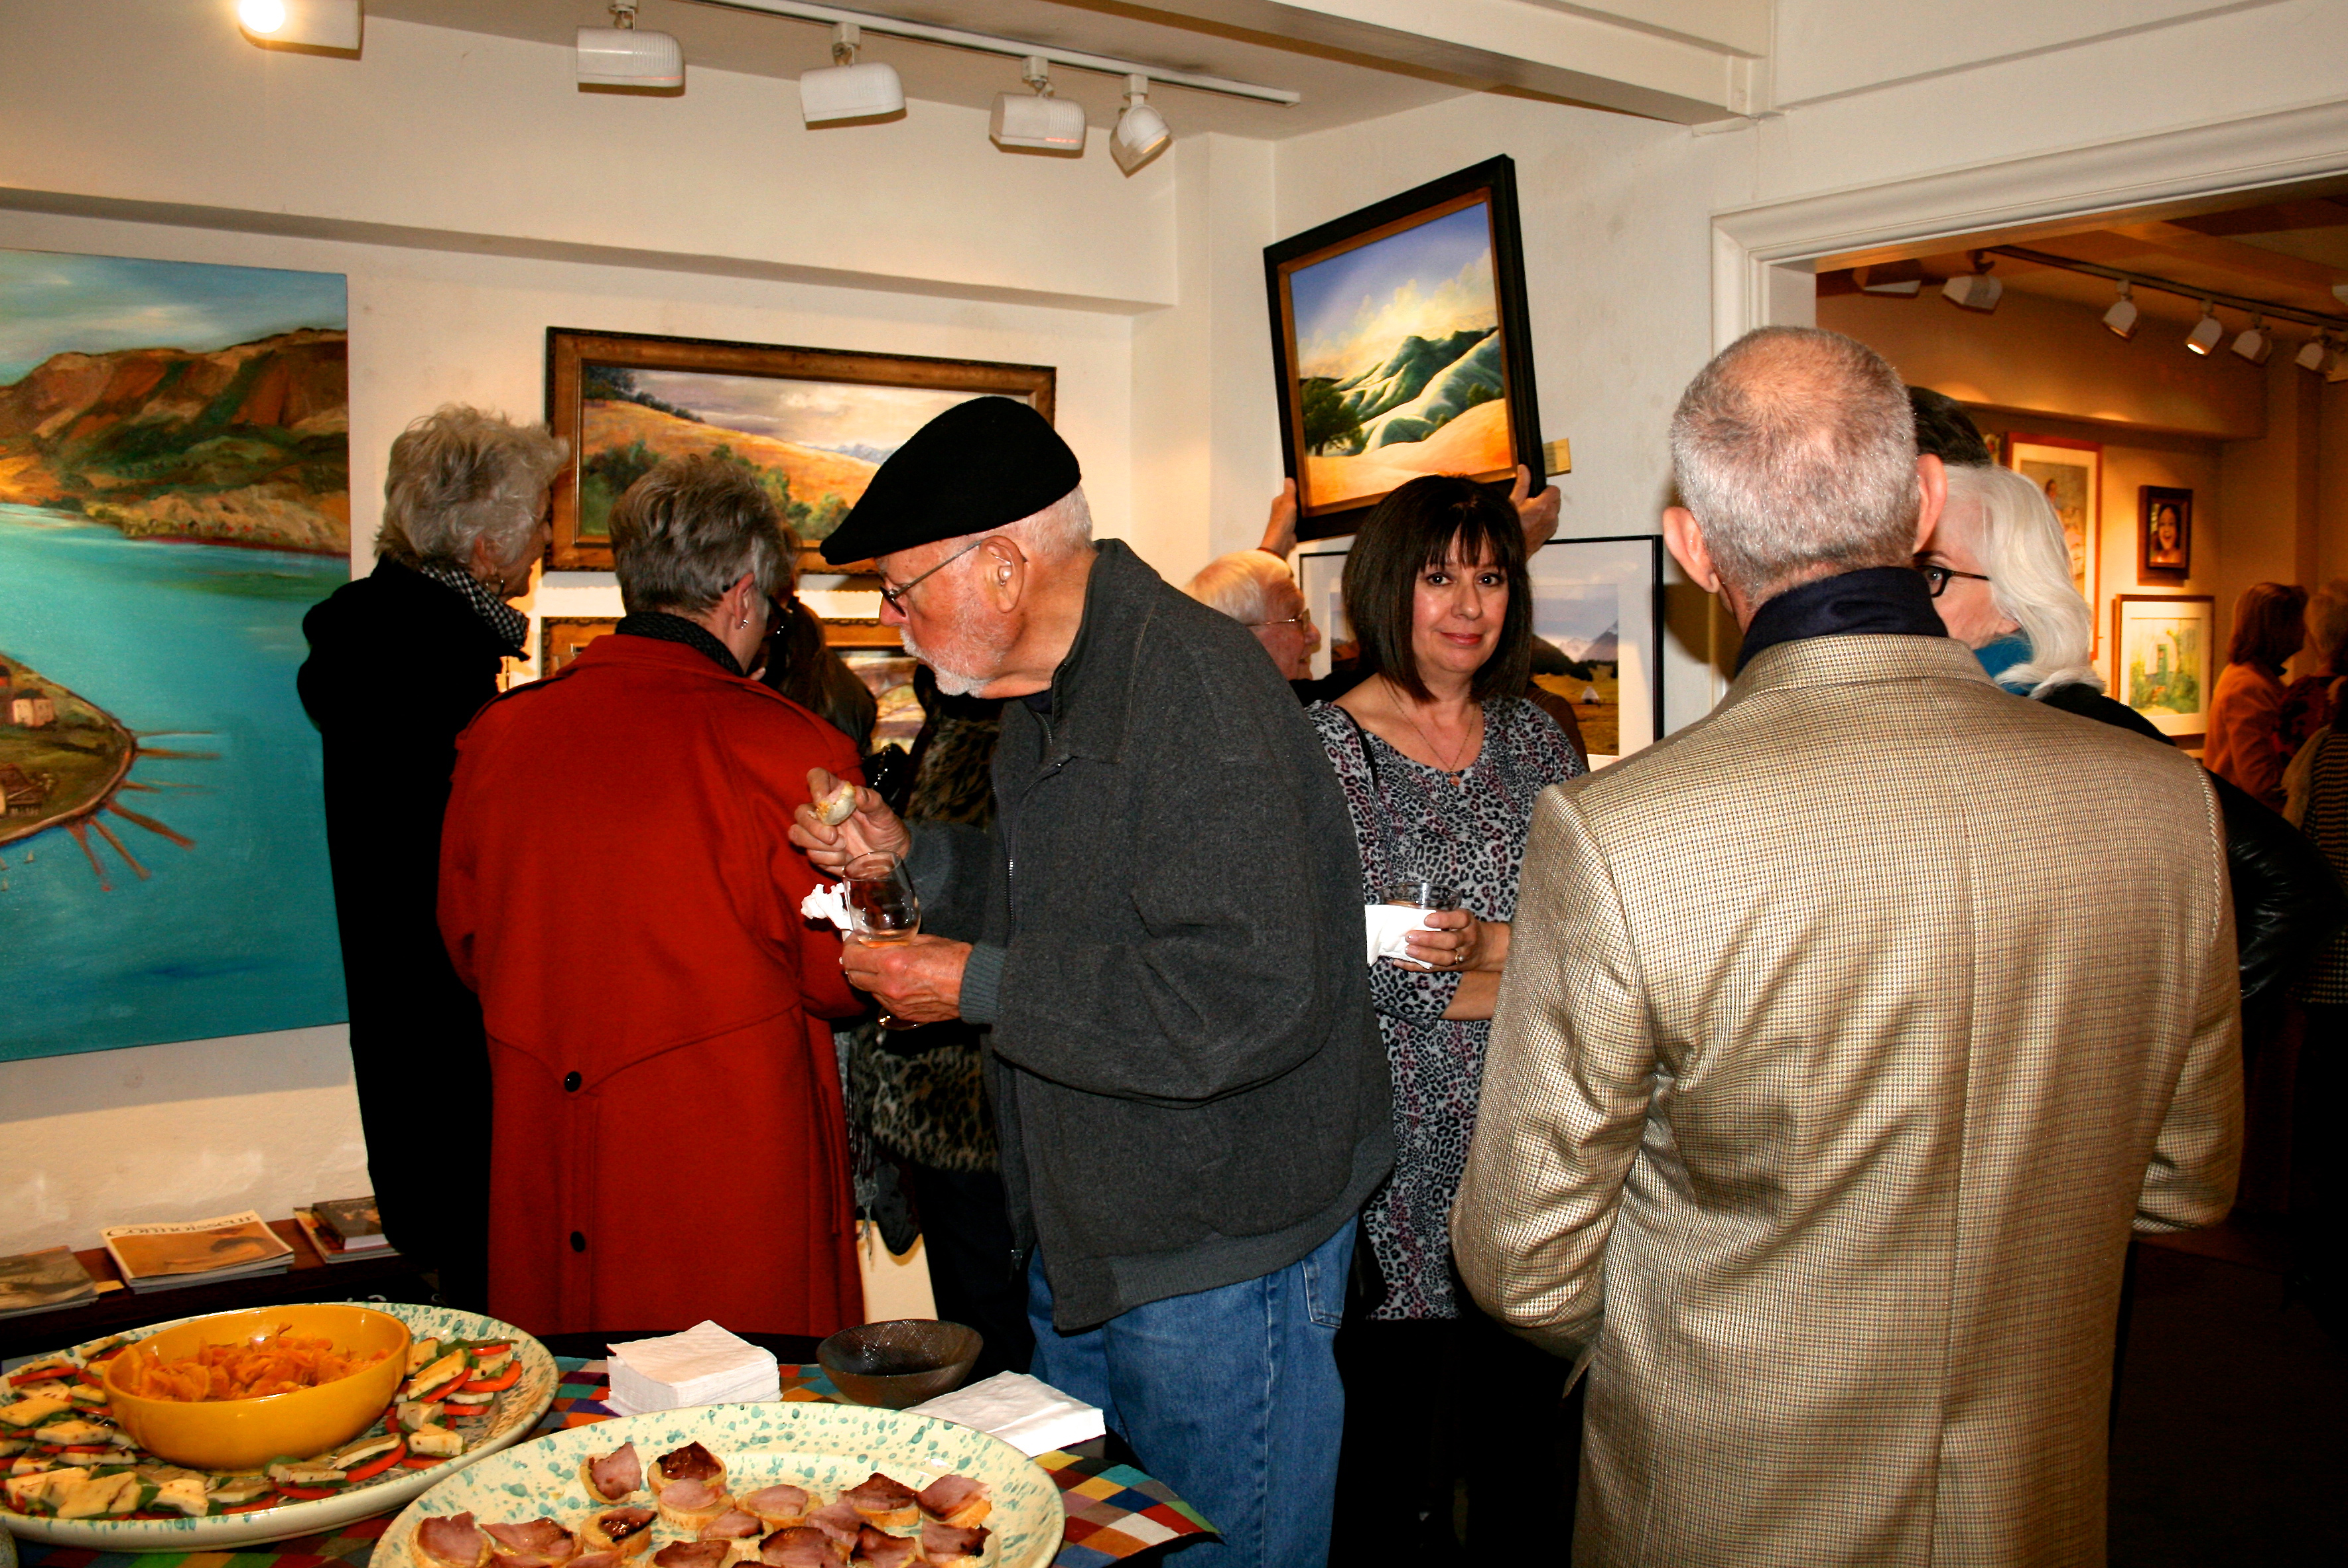 LGMG HR Artists and Guests chowing down and mingling - photo Marie Cameron 2013